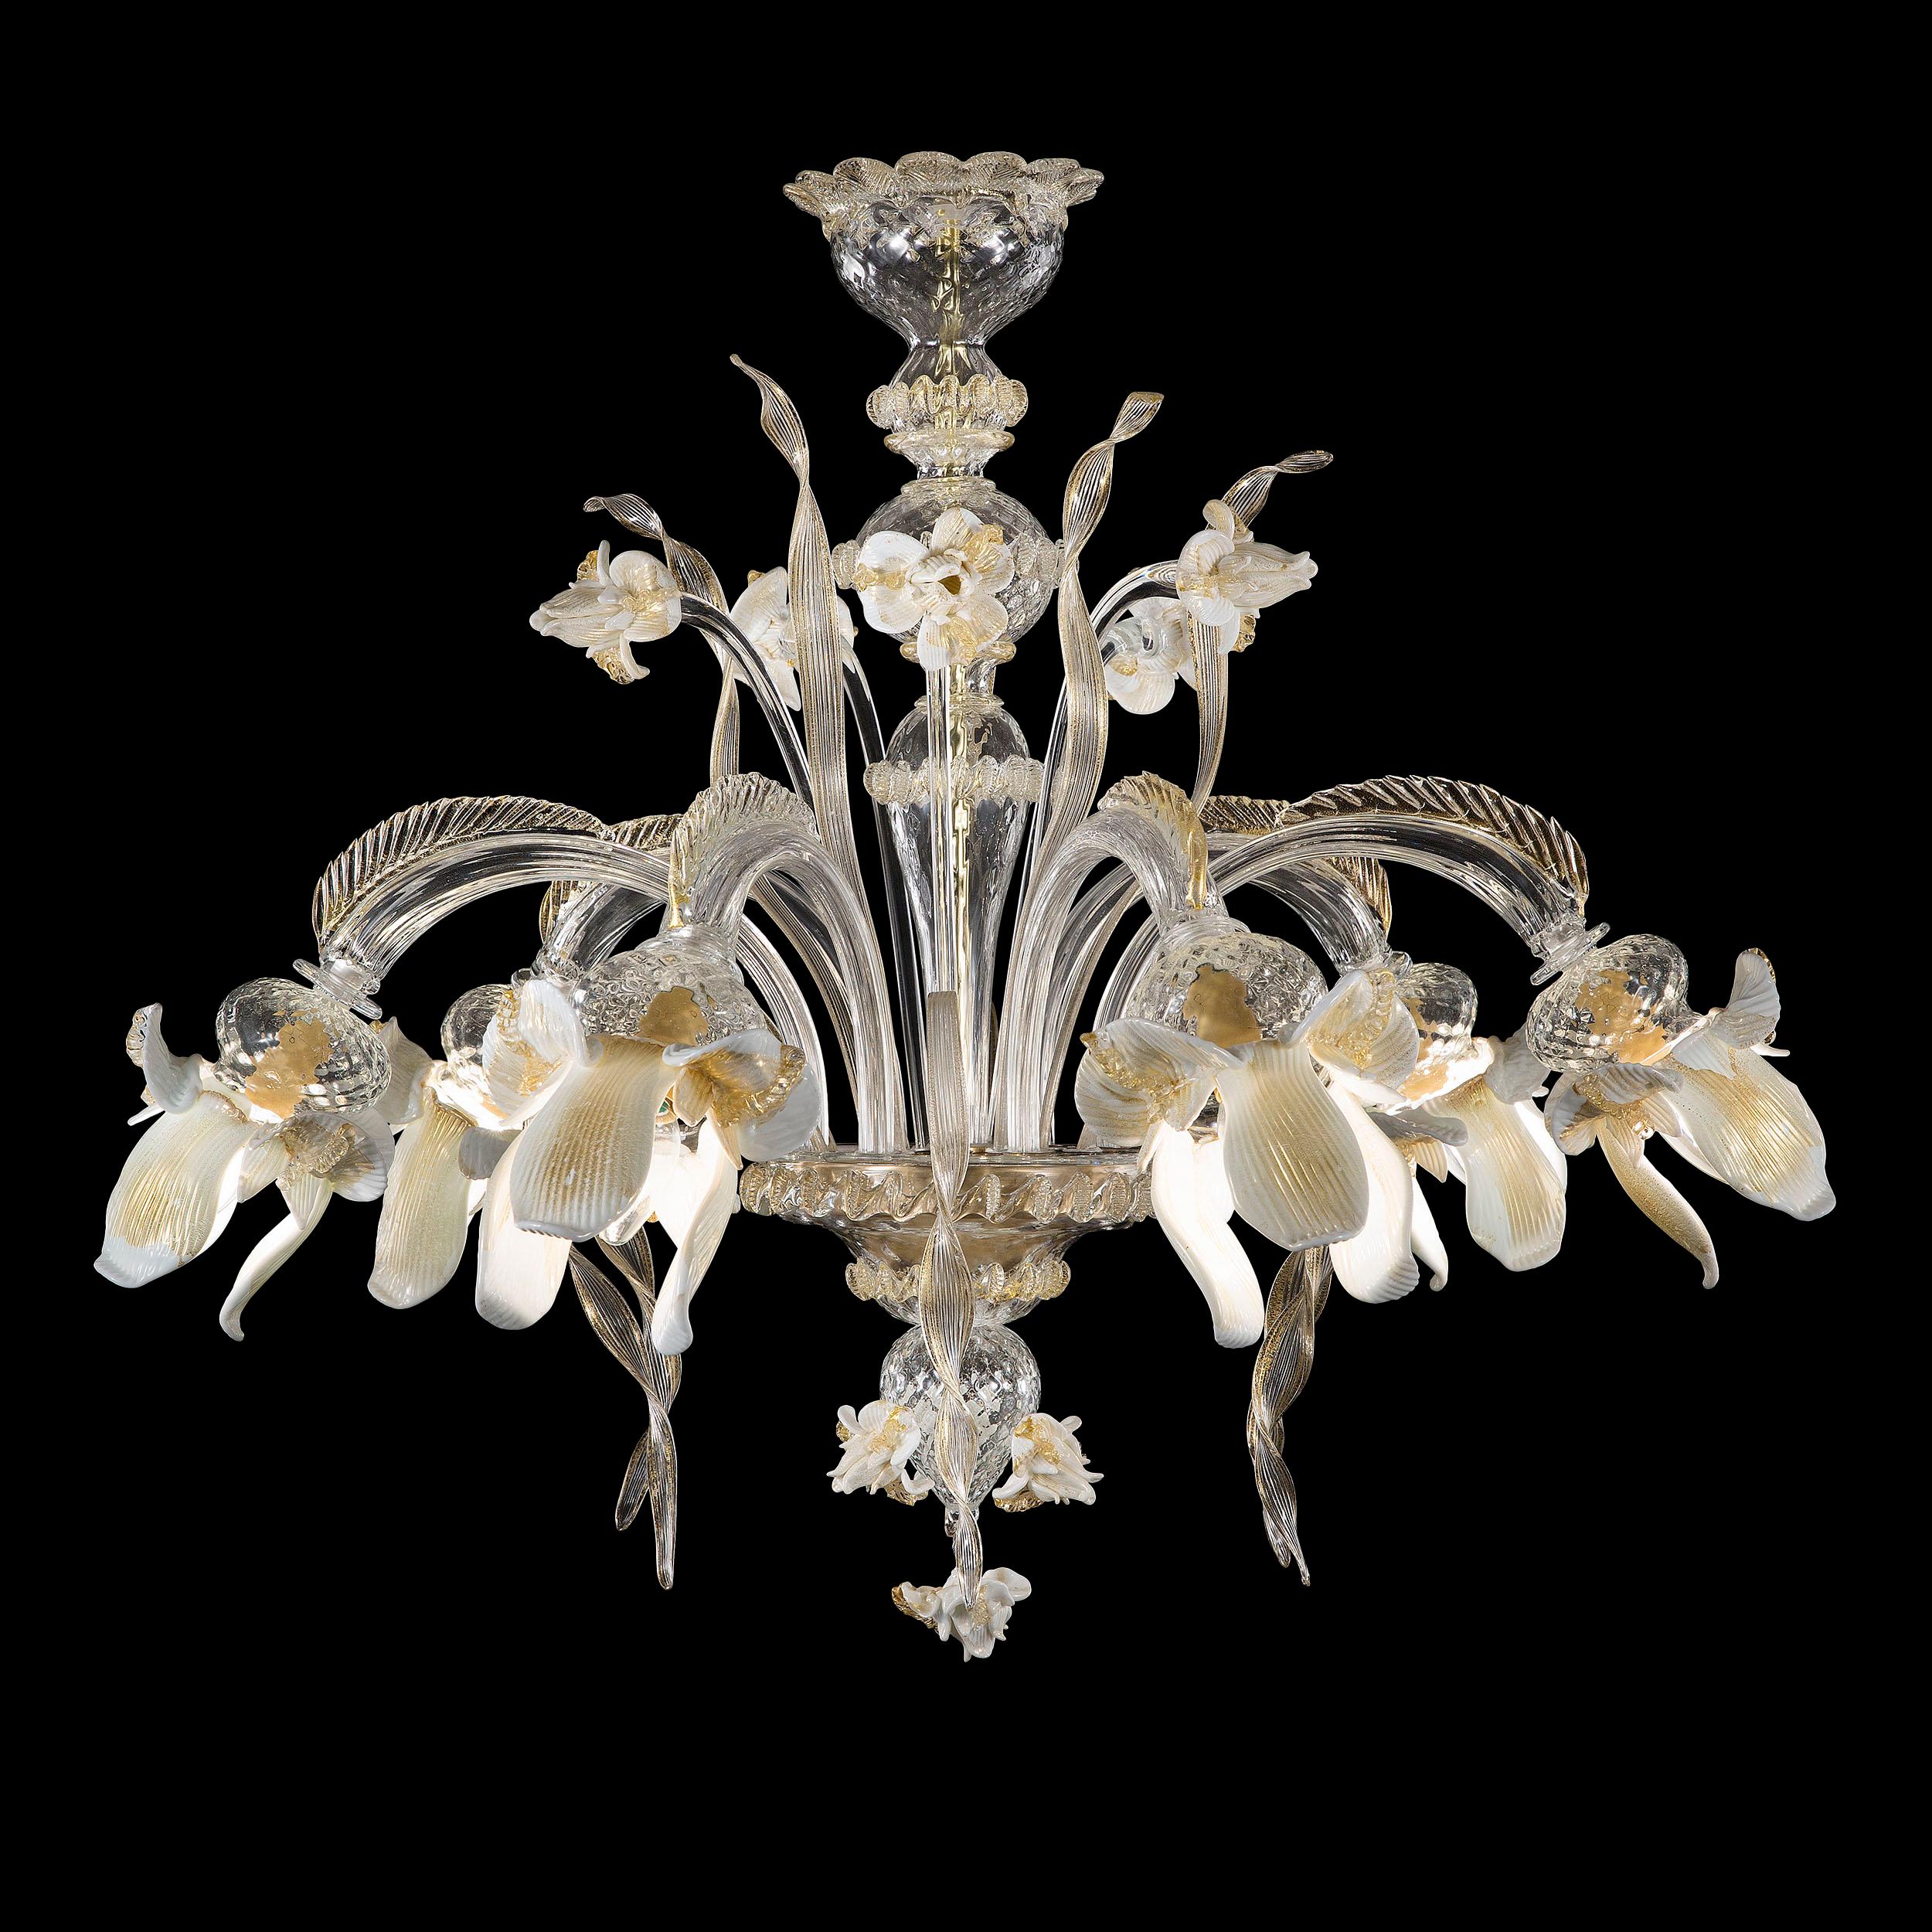 Artistic chandelier 6 armsclear-gold-white in Murano glass Iris garden by Multiforme.
Original and innovative artistic glass collection Iris garden. A collection inspired from the flowers. Iris garden is a lighting work that stands out thanks to